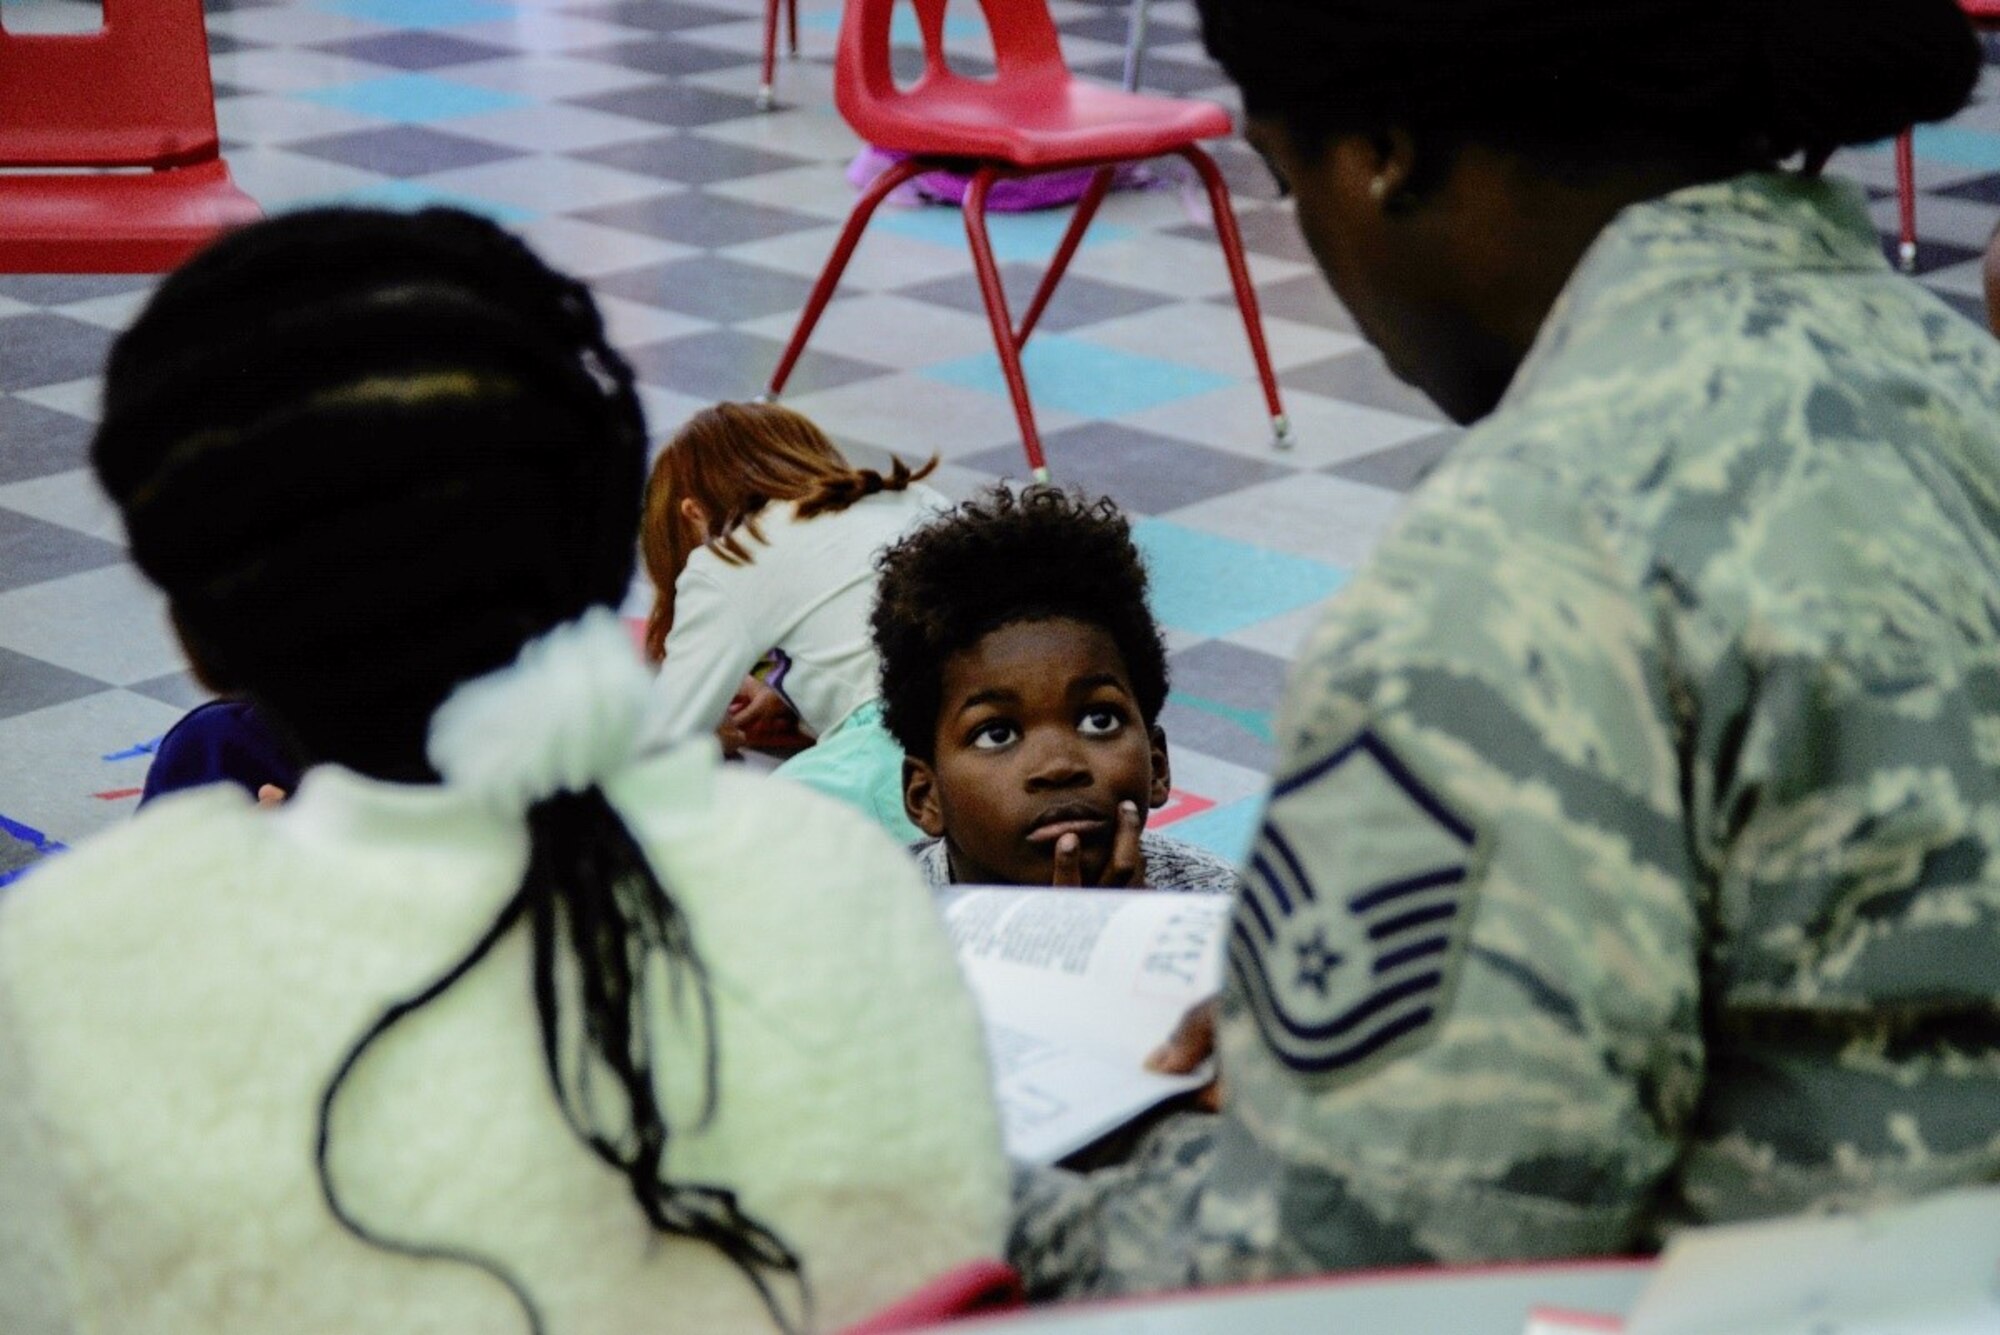 A Master Sgt. reads to a child at the Kirtland Youth Center.